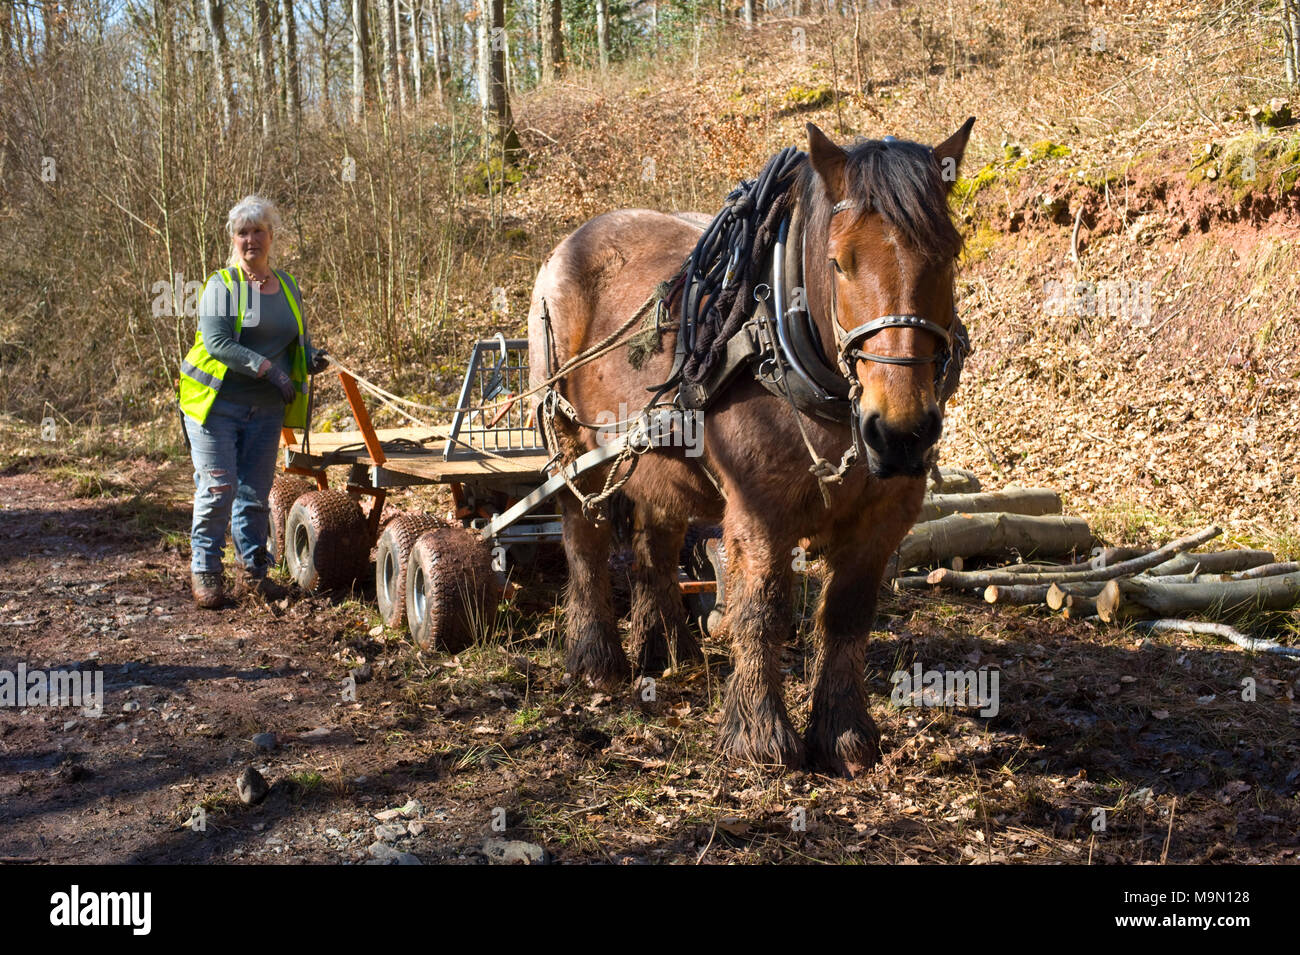 Horse logging in a beech woodland near Talgarth Powys Wales UK. Horses are used to pull logs out of difficult terrain inaccessible for vehicles. Stock Photo